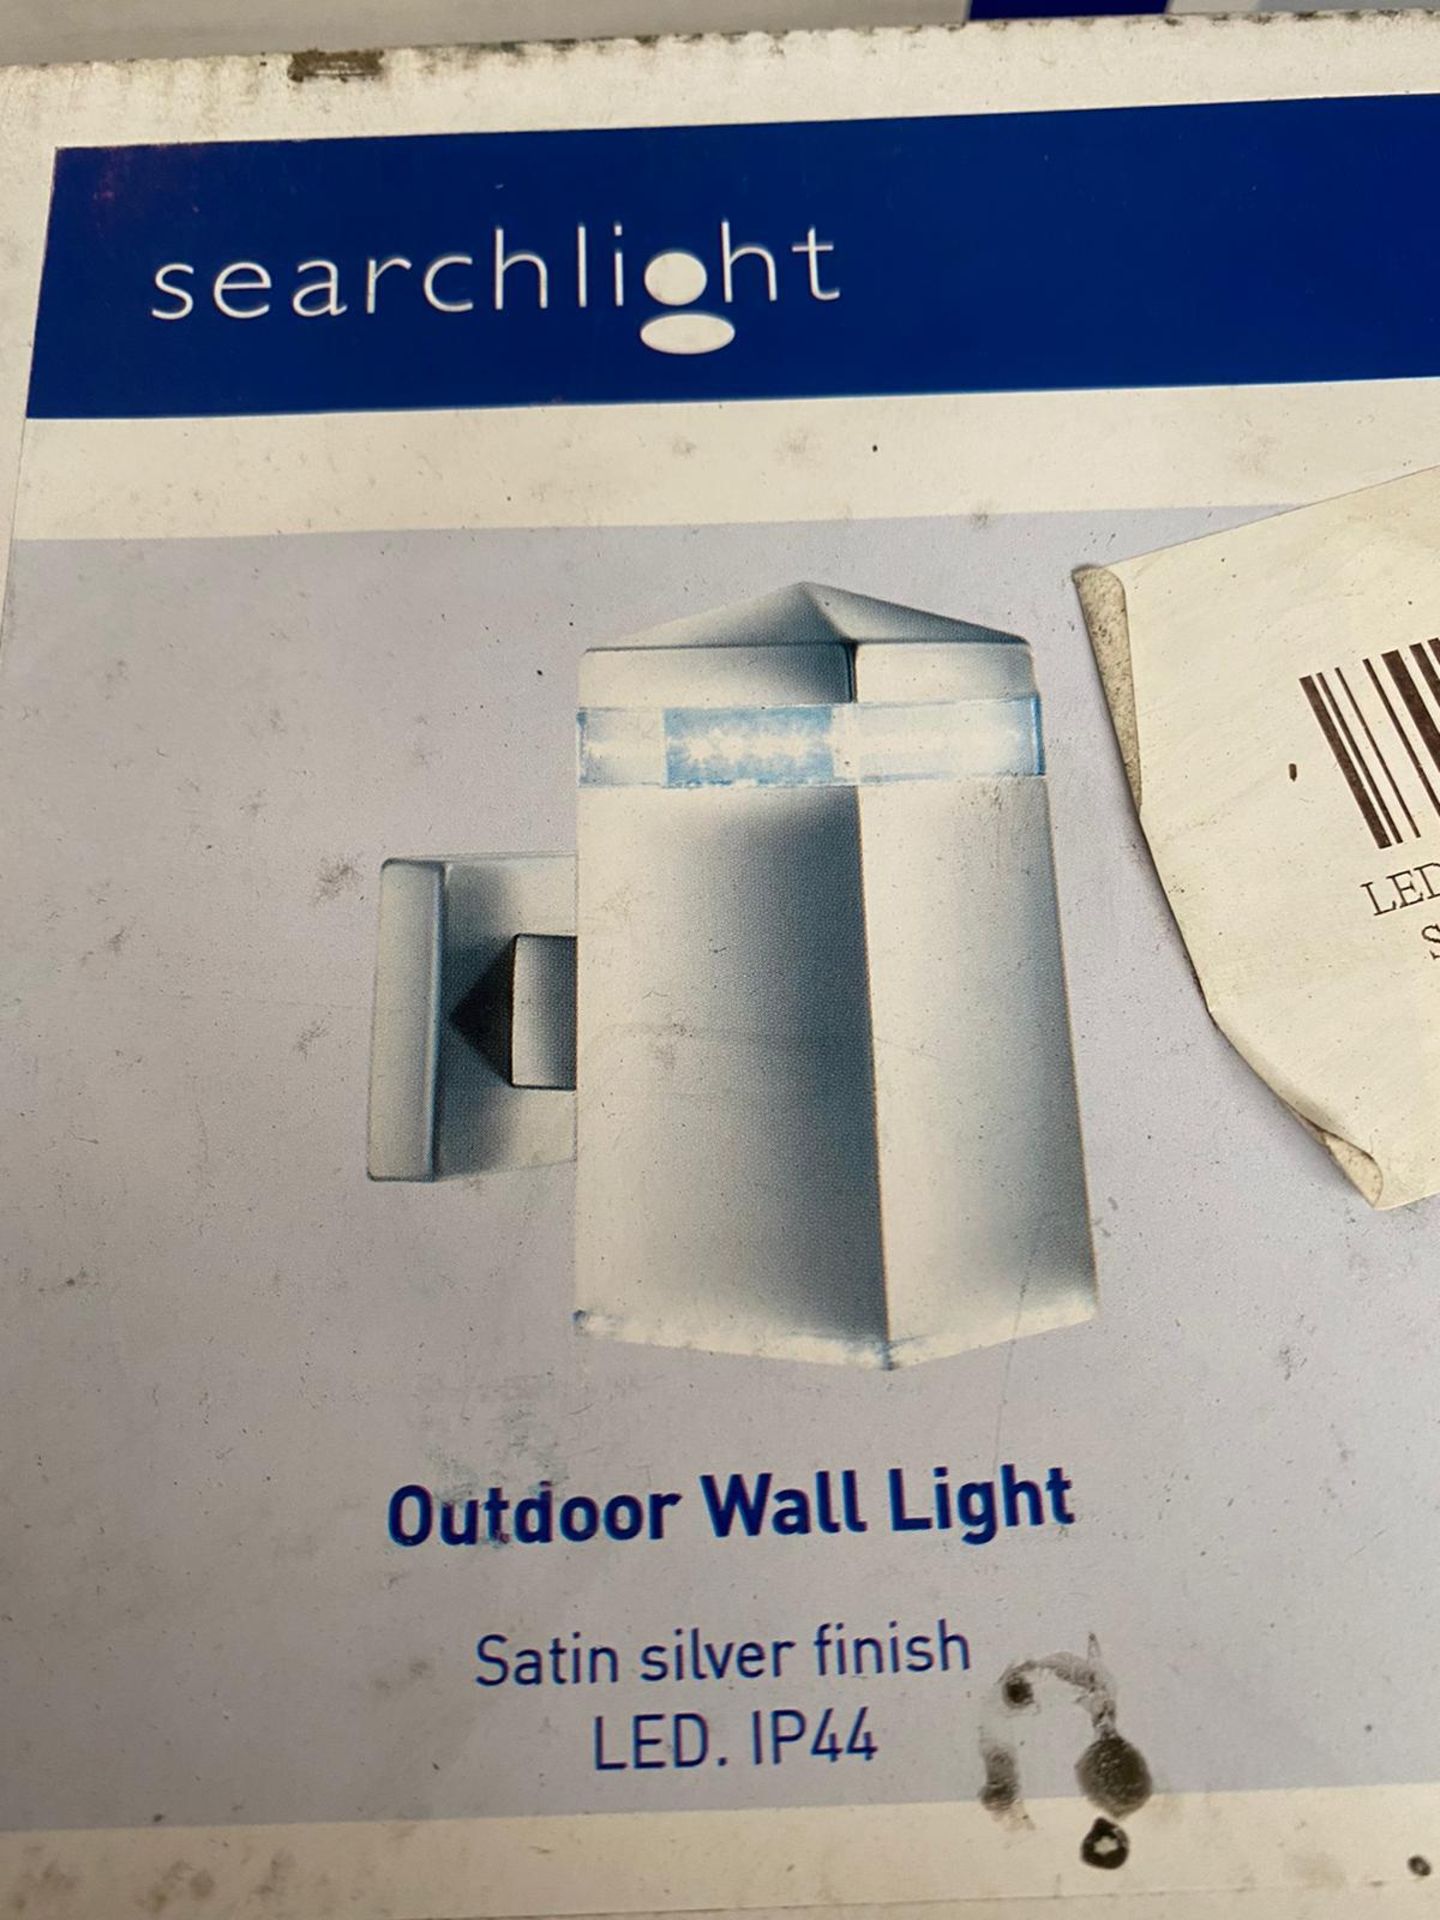 2 x Searchlight LED Outdoor Wall Light in satin silver - Ref: 7205 - New and Boxed - RRP: £80 each